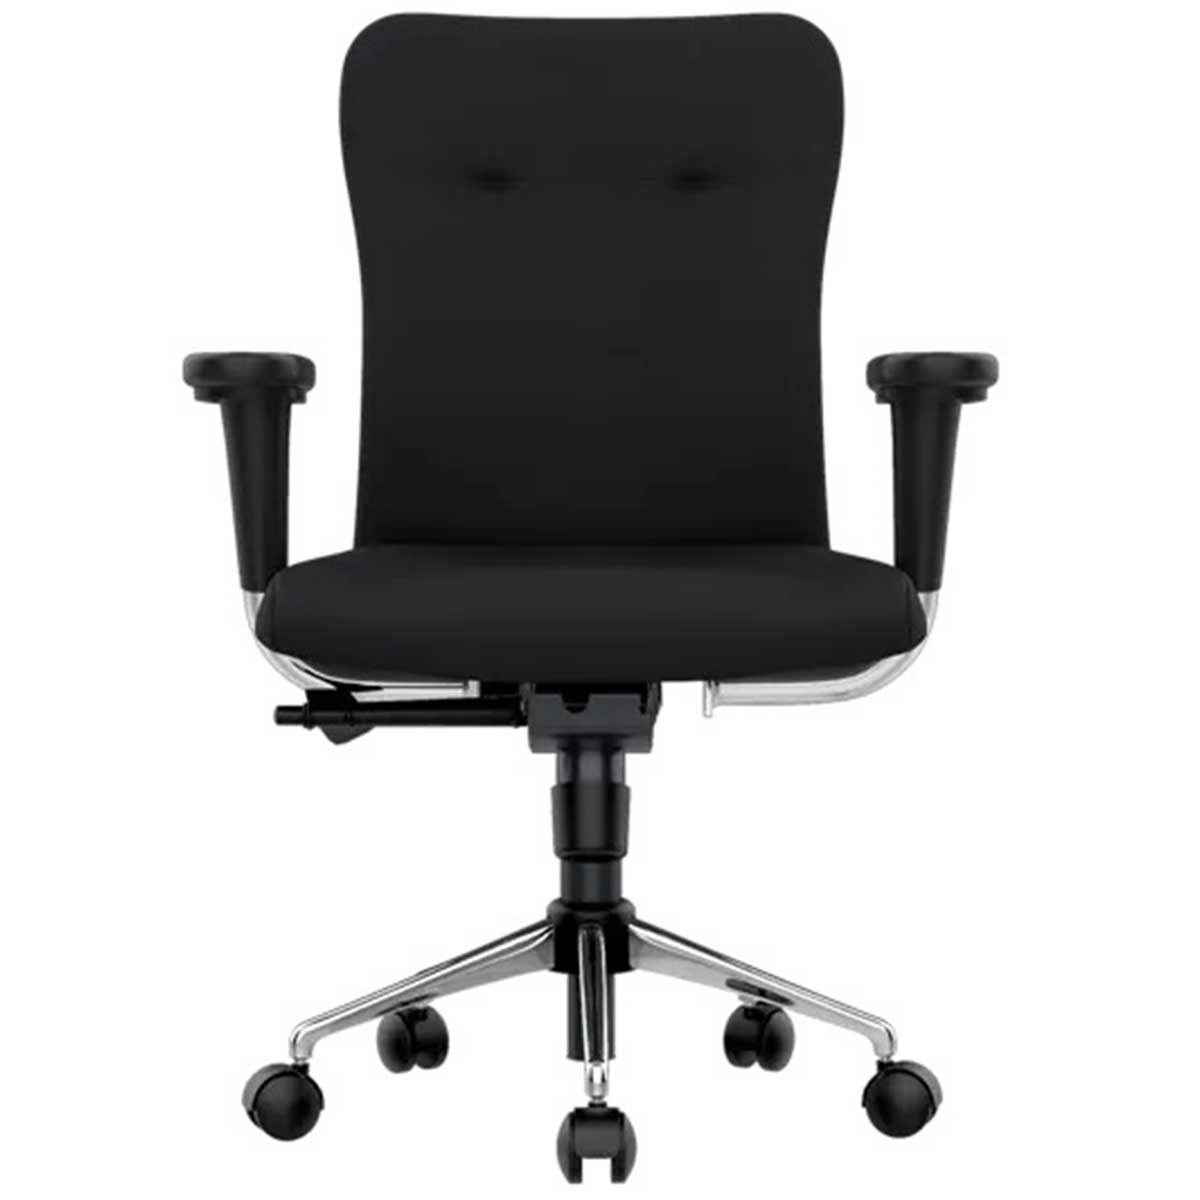 Fabric Office Chair Manufacturers, Suppliers in Connaught Place